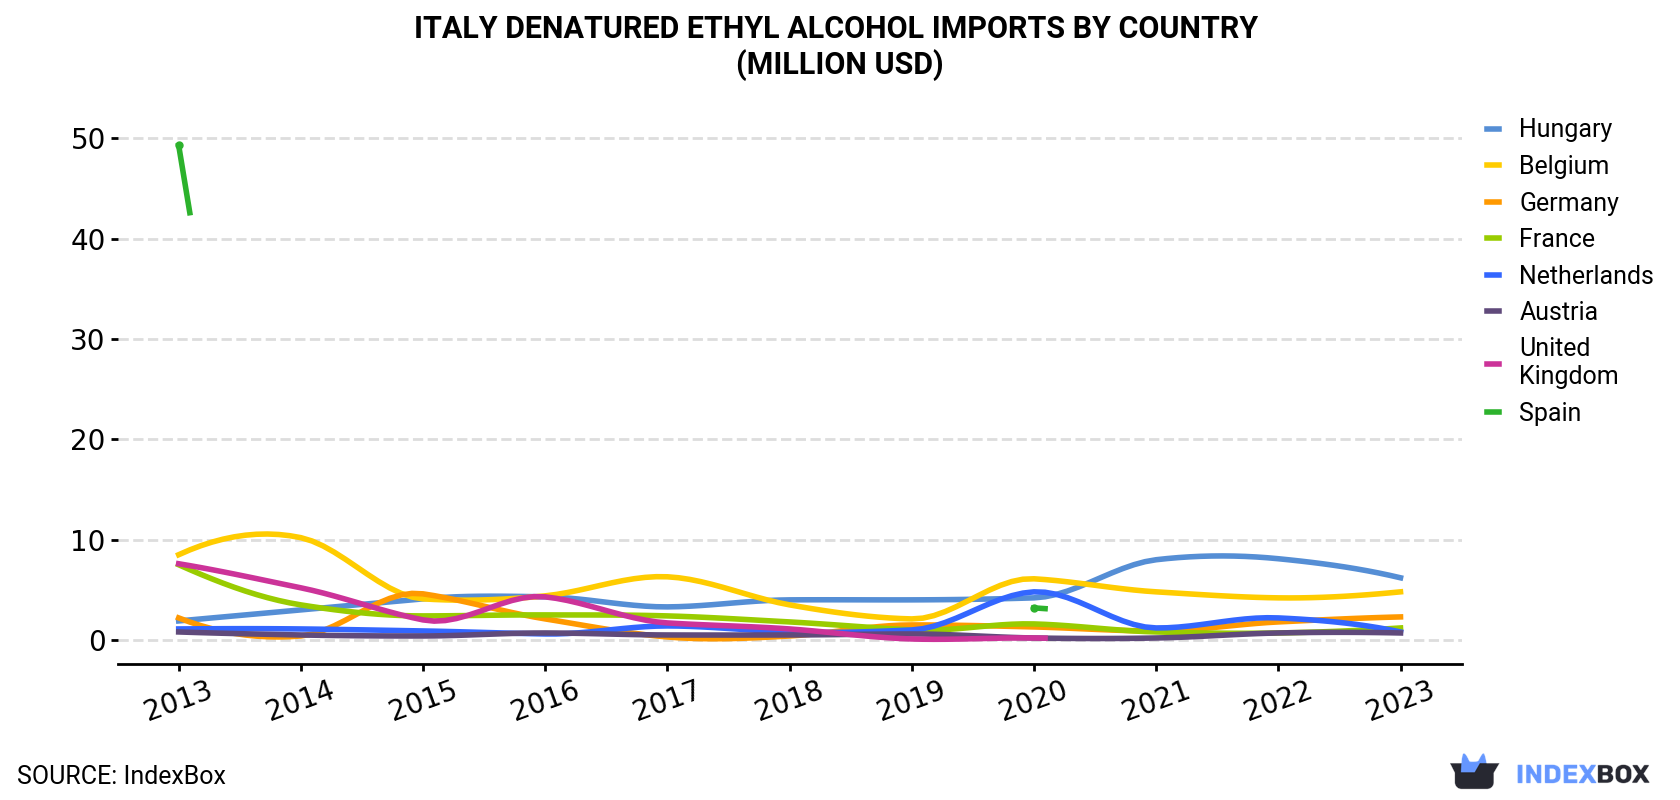 Italy Denatured Ethyl Alcohol Imports By Country (Million USD)